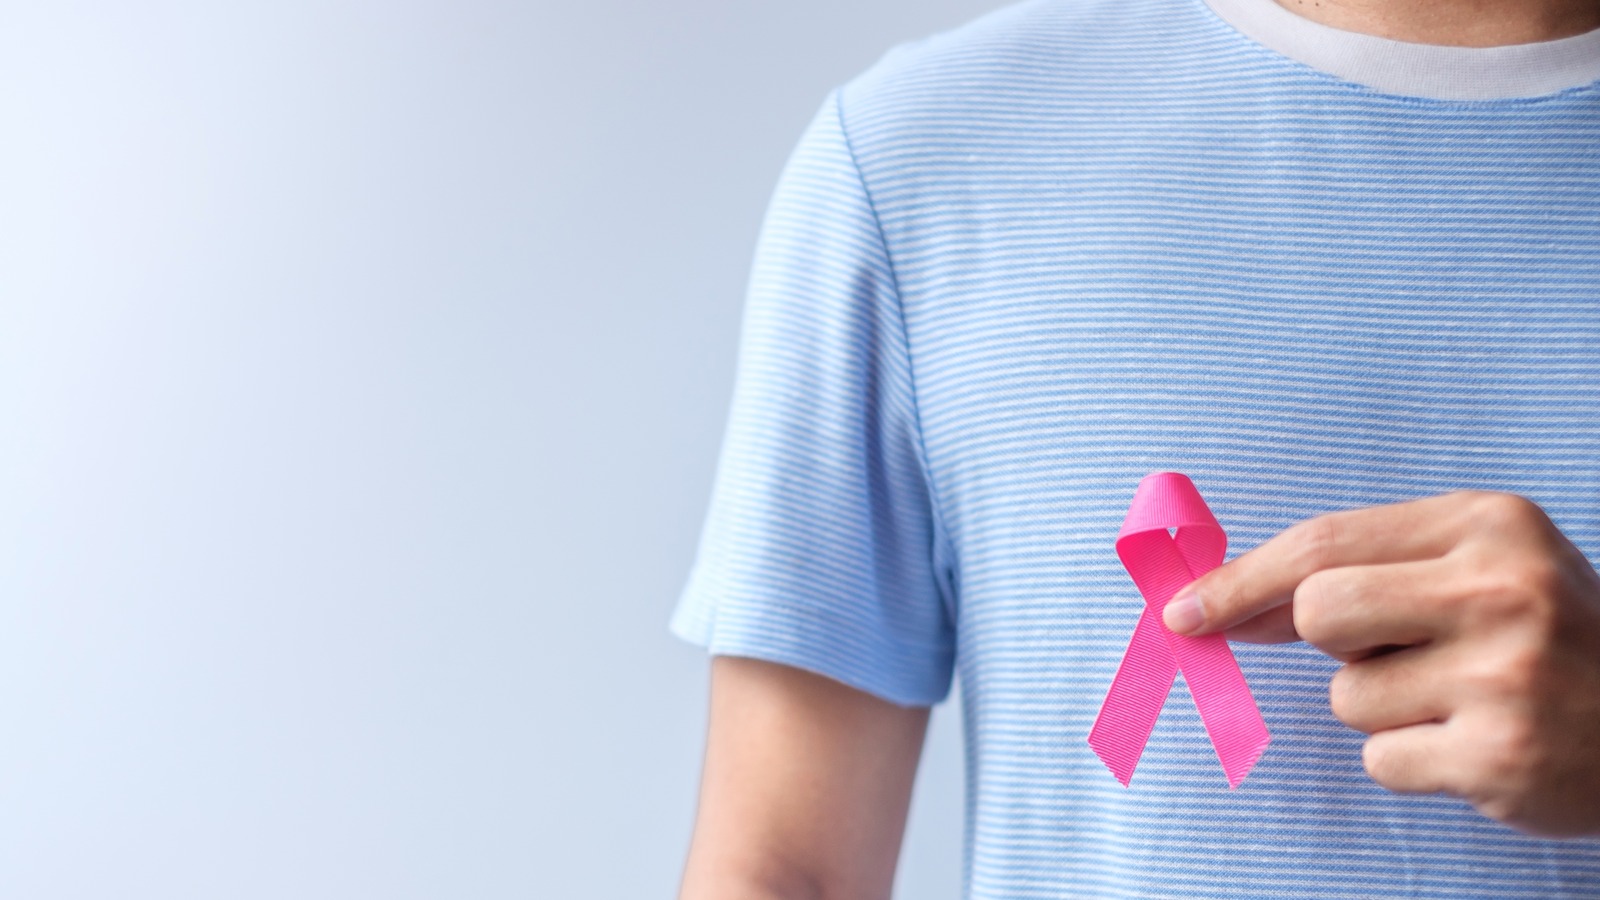 Can Men Get Breast Cancer